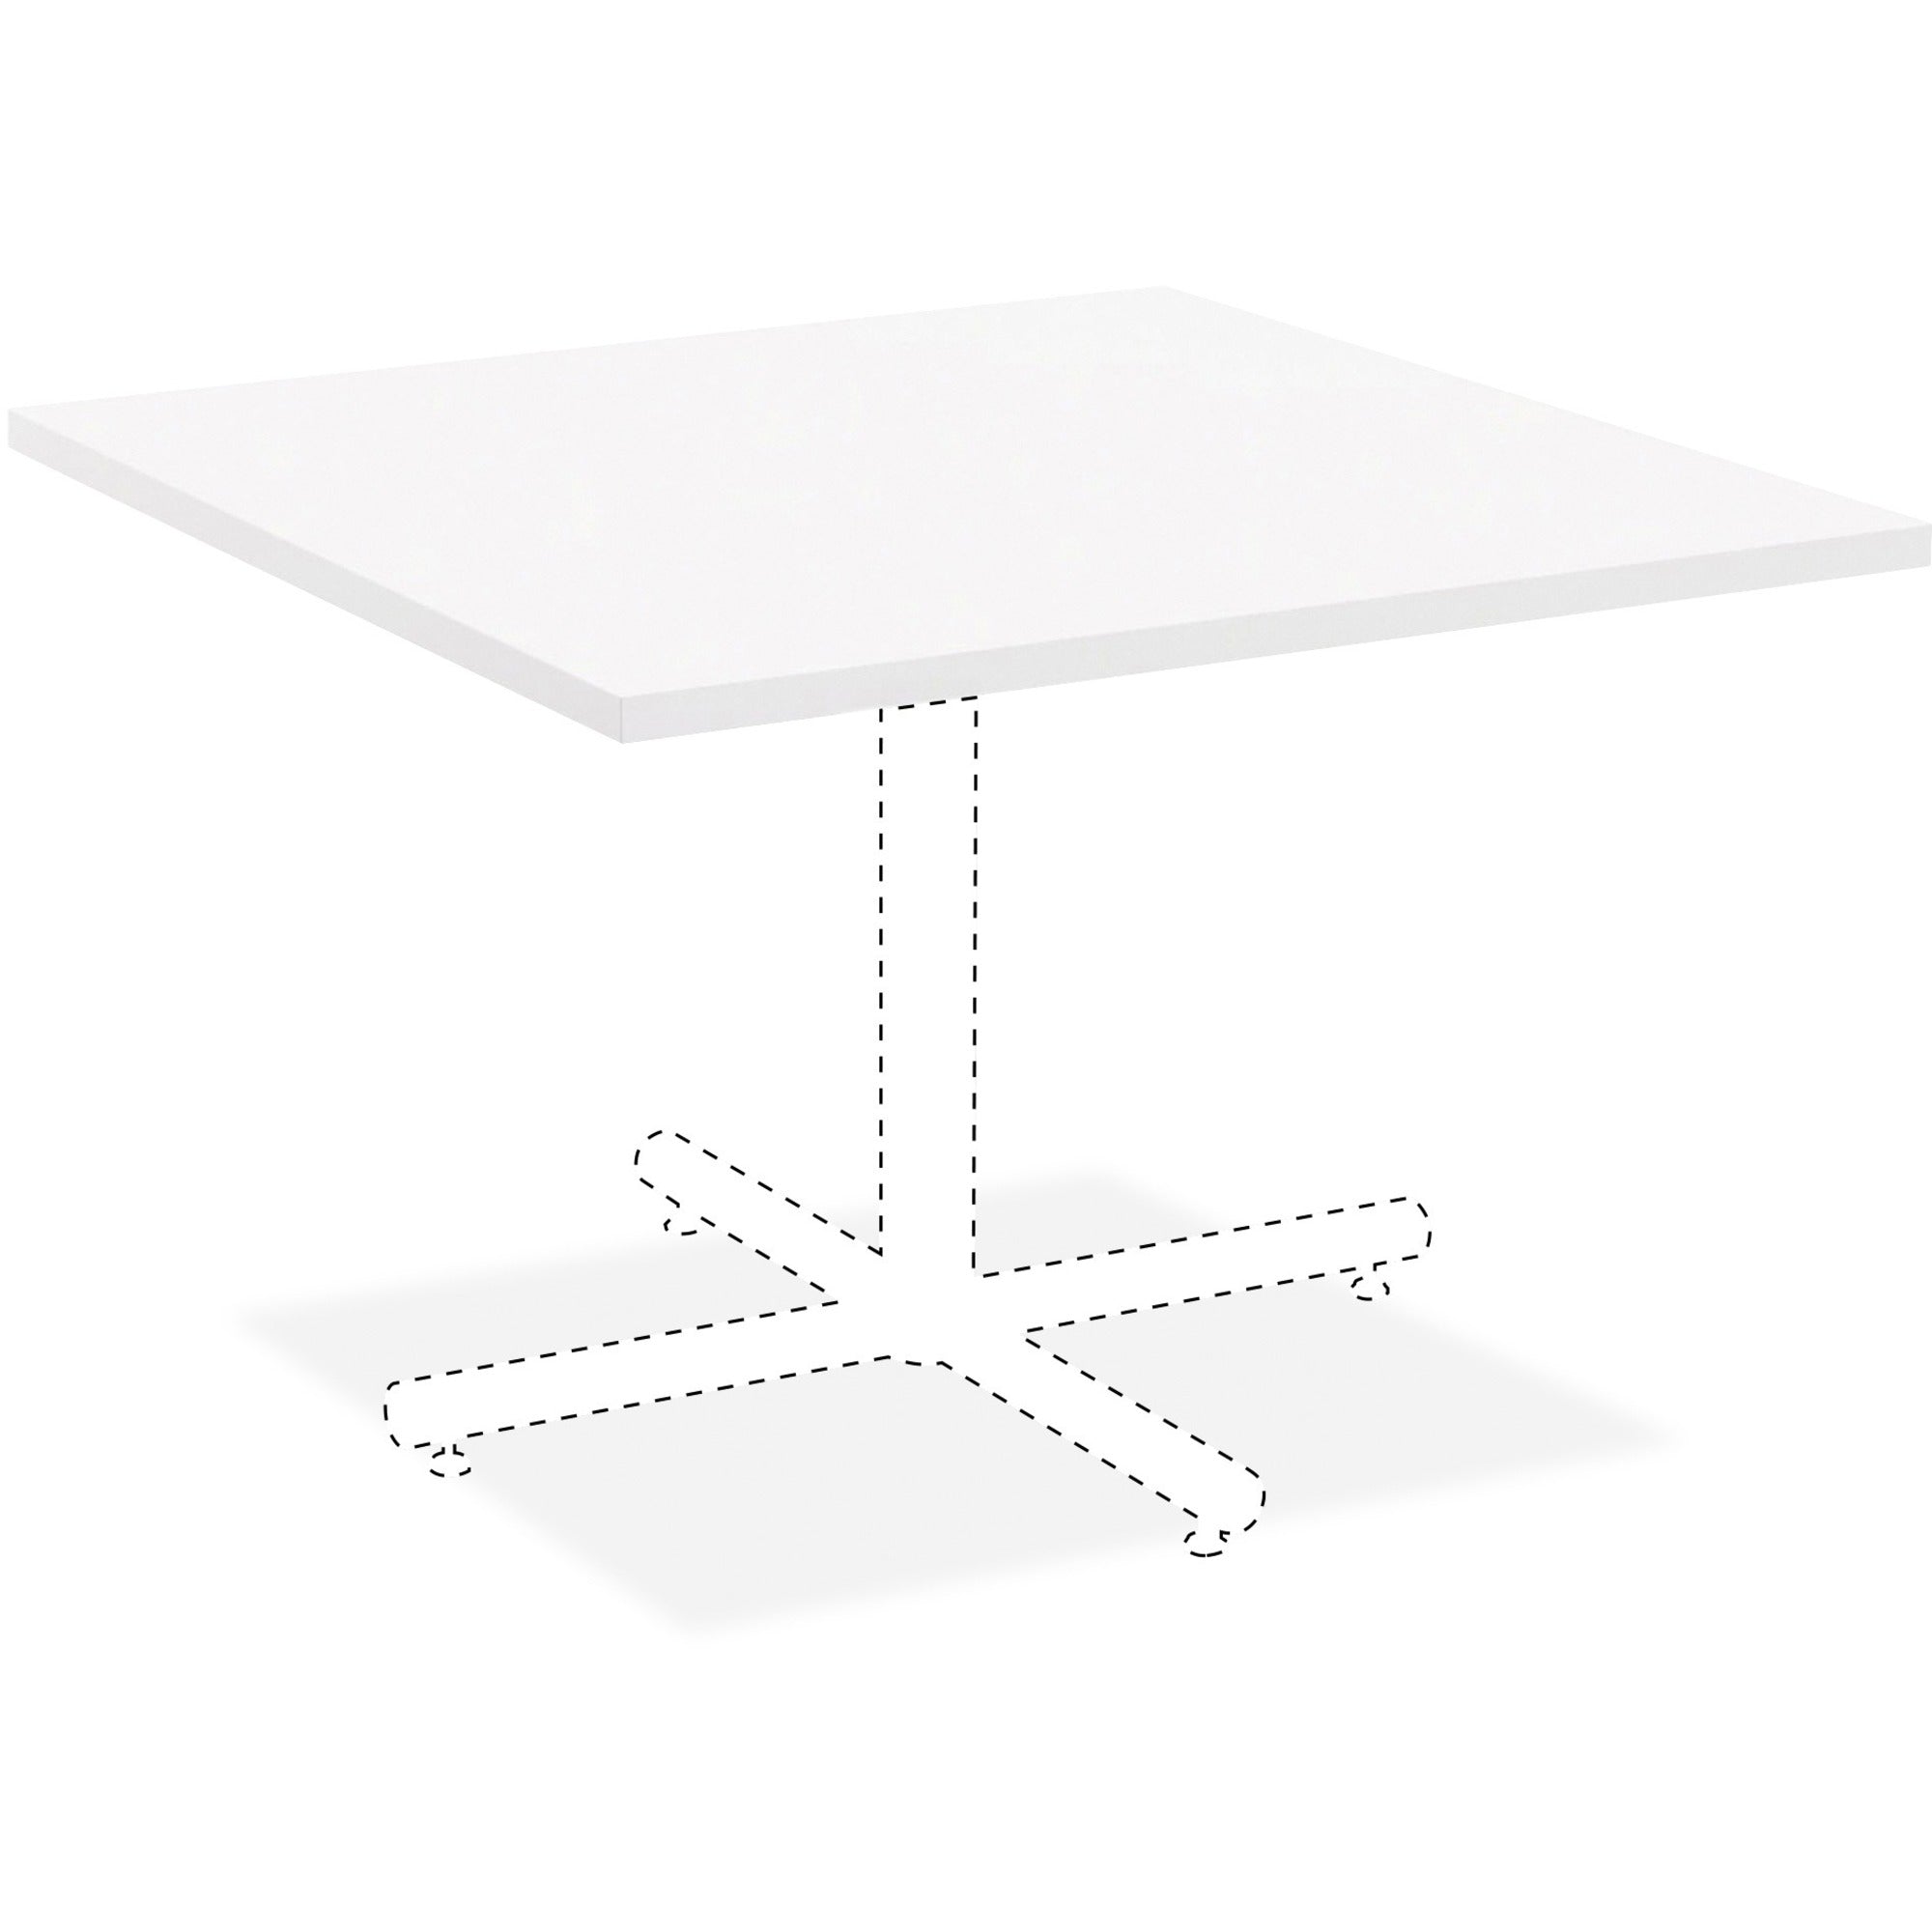 lorell-hospitality-collection-tabletop-for-table-tophigh-pressure-laminate-hpl-square-white-top-x-42-table-top-width-x-42-table-top-depth-x-1-table-top-thickness-assembly-required-1-each_llr99859 - 1